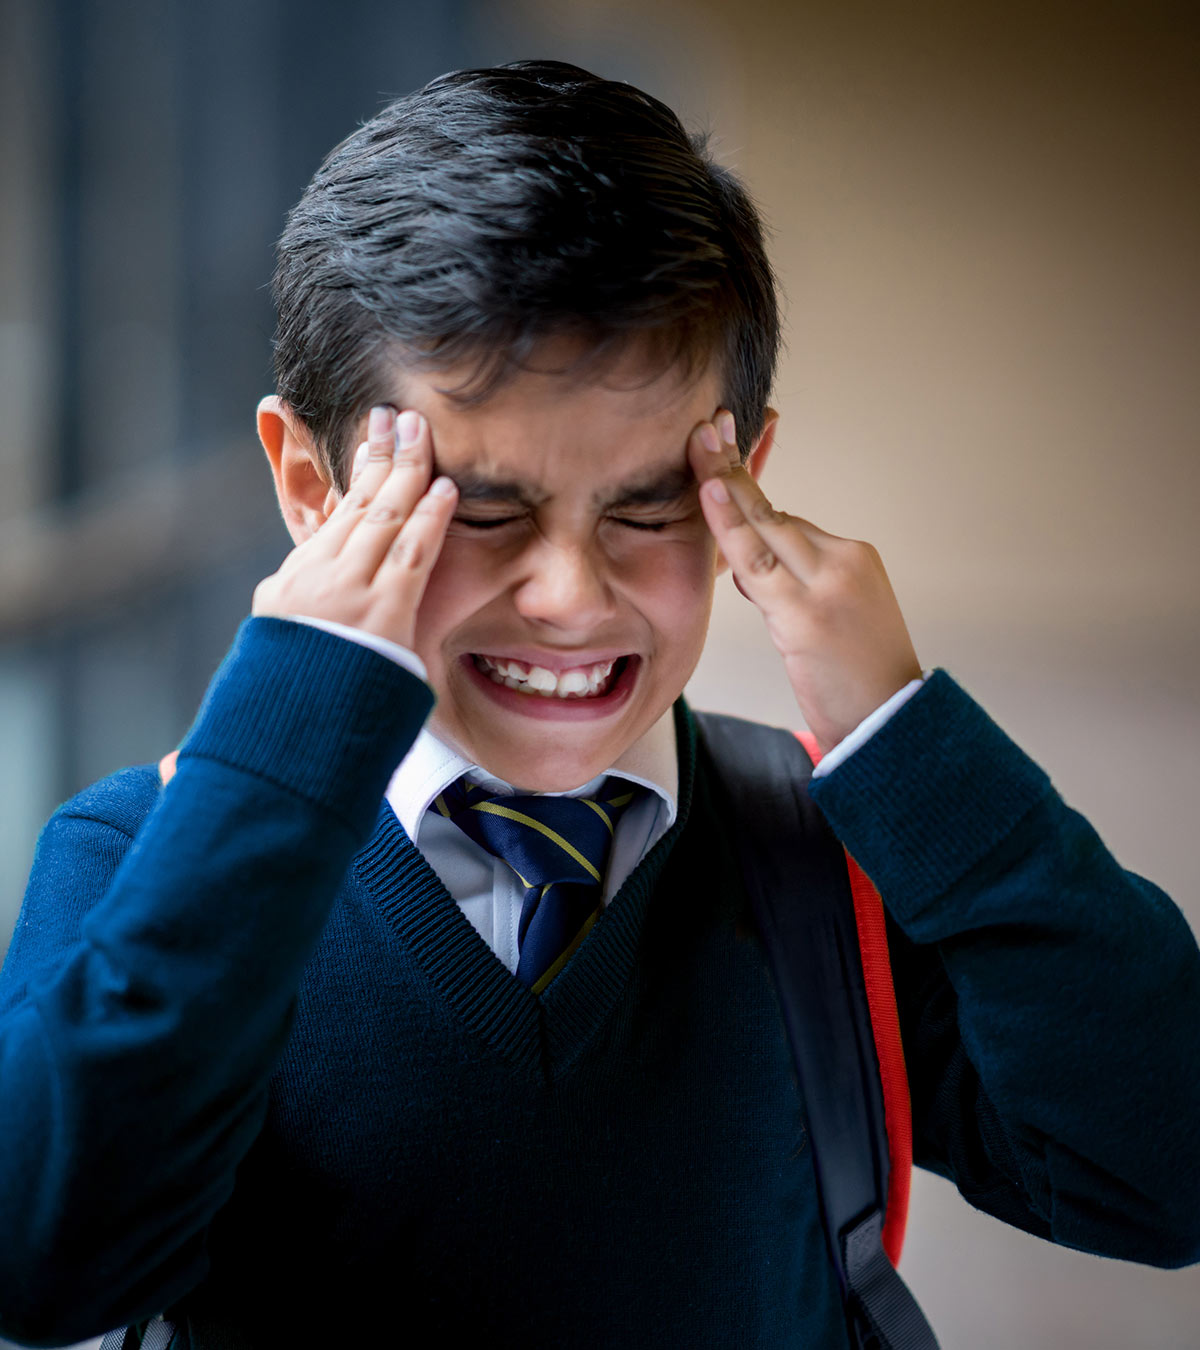 Headaches In Children: Why Do They Occur And What You Can Do